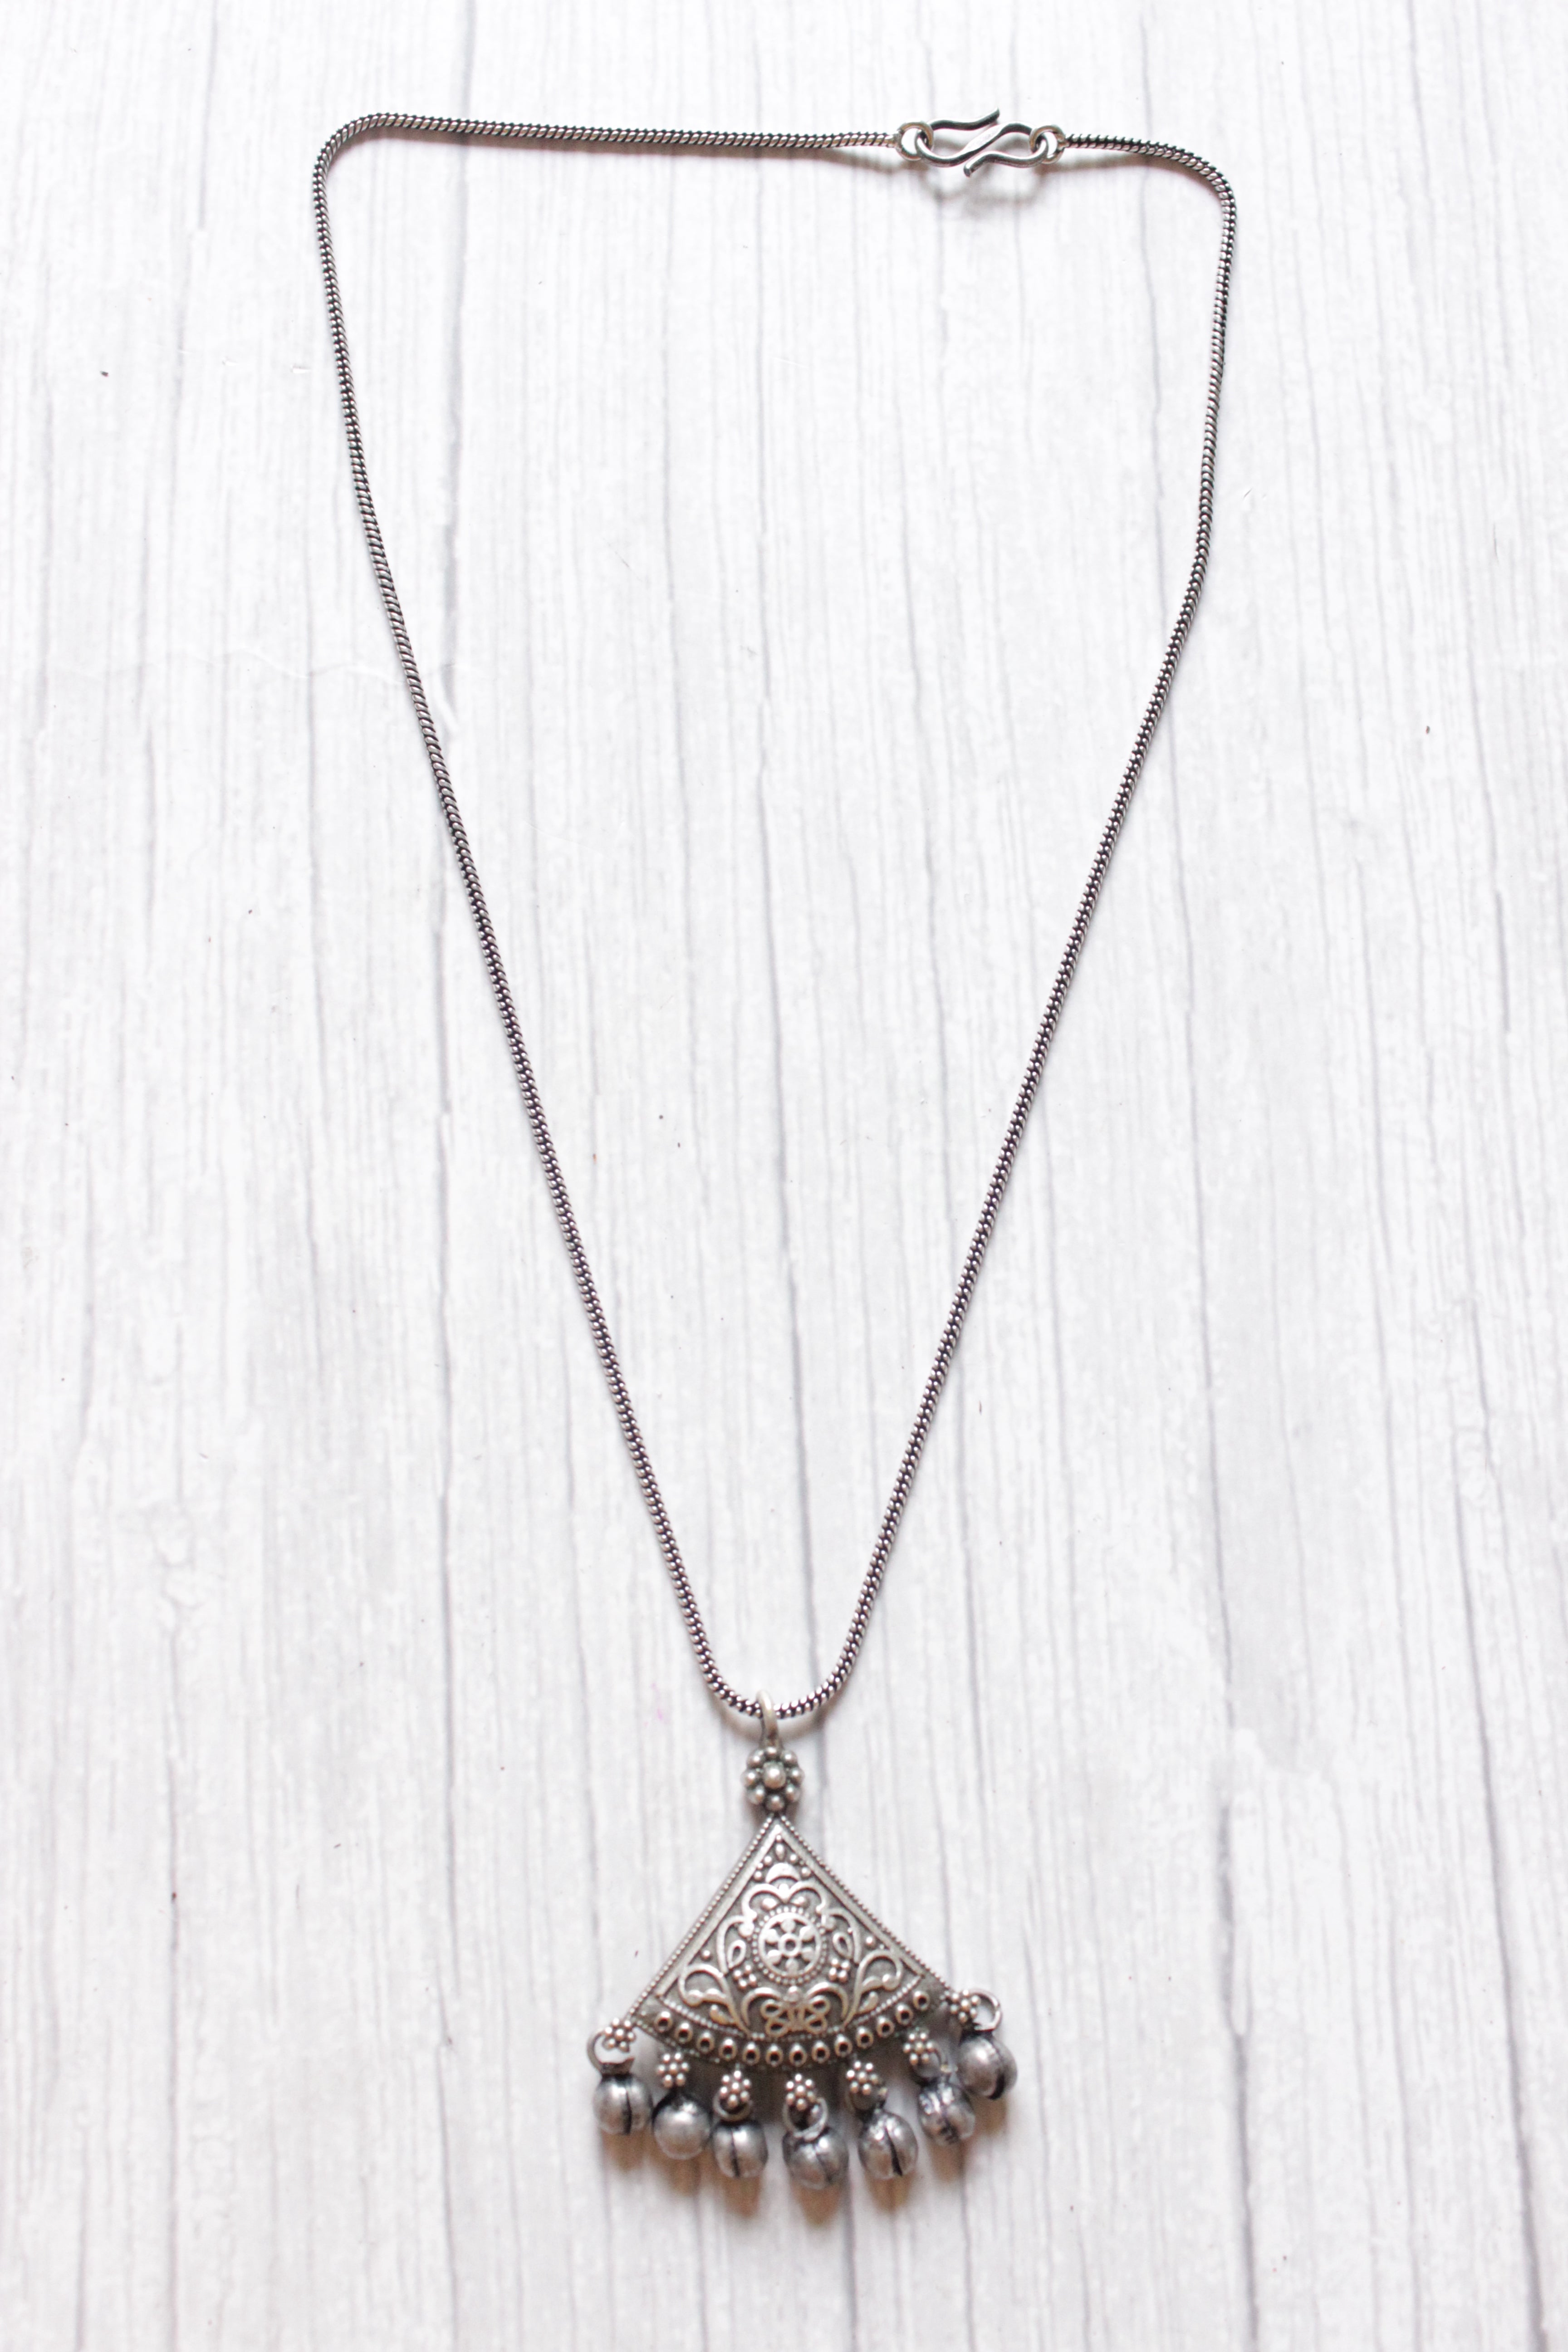 Oxidised Silver Metal Beads Embellished Triangular Chain Necklace